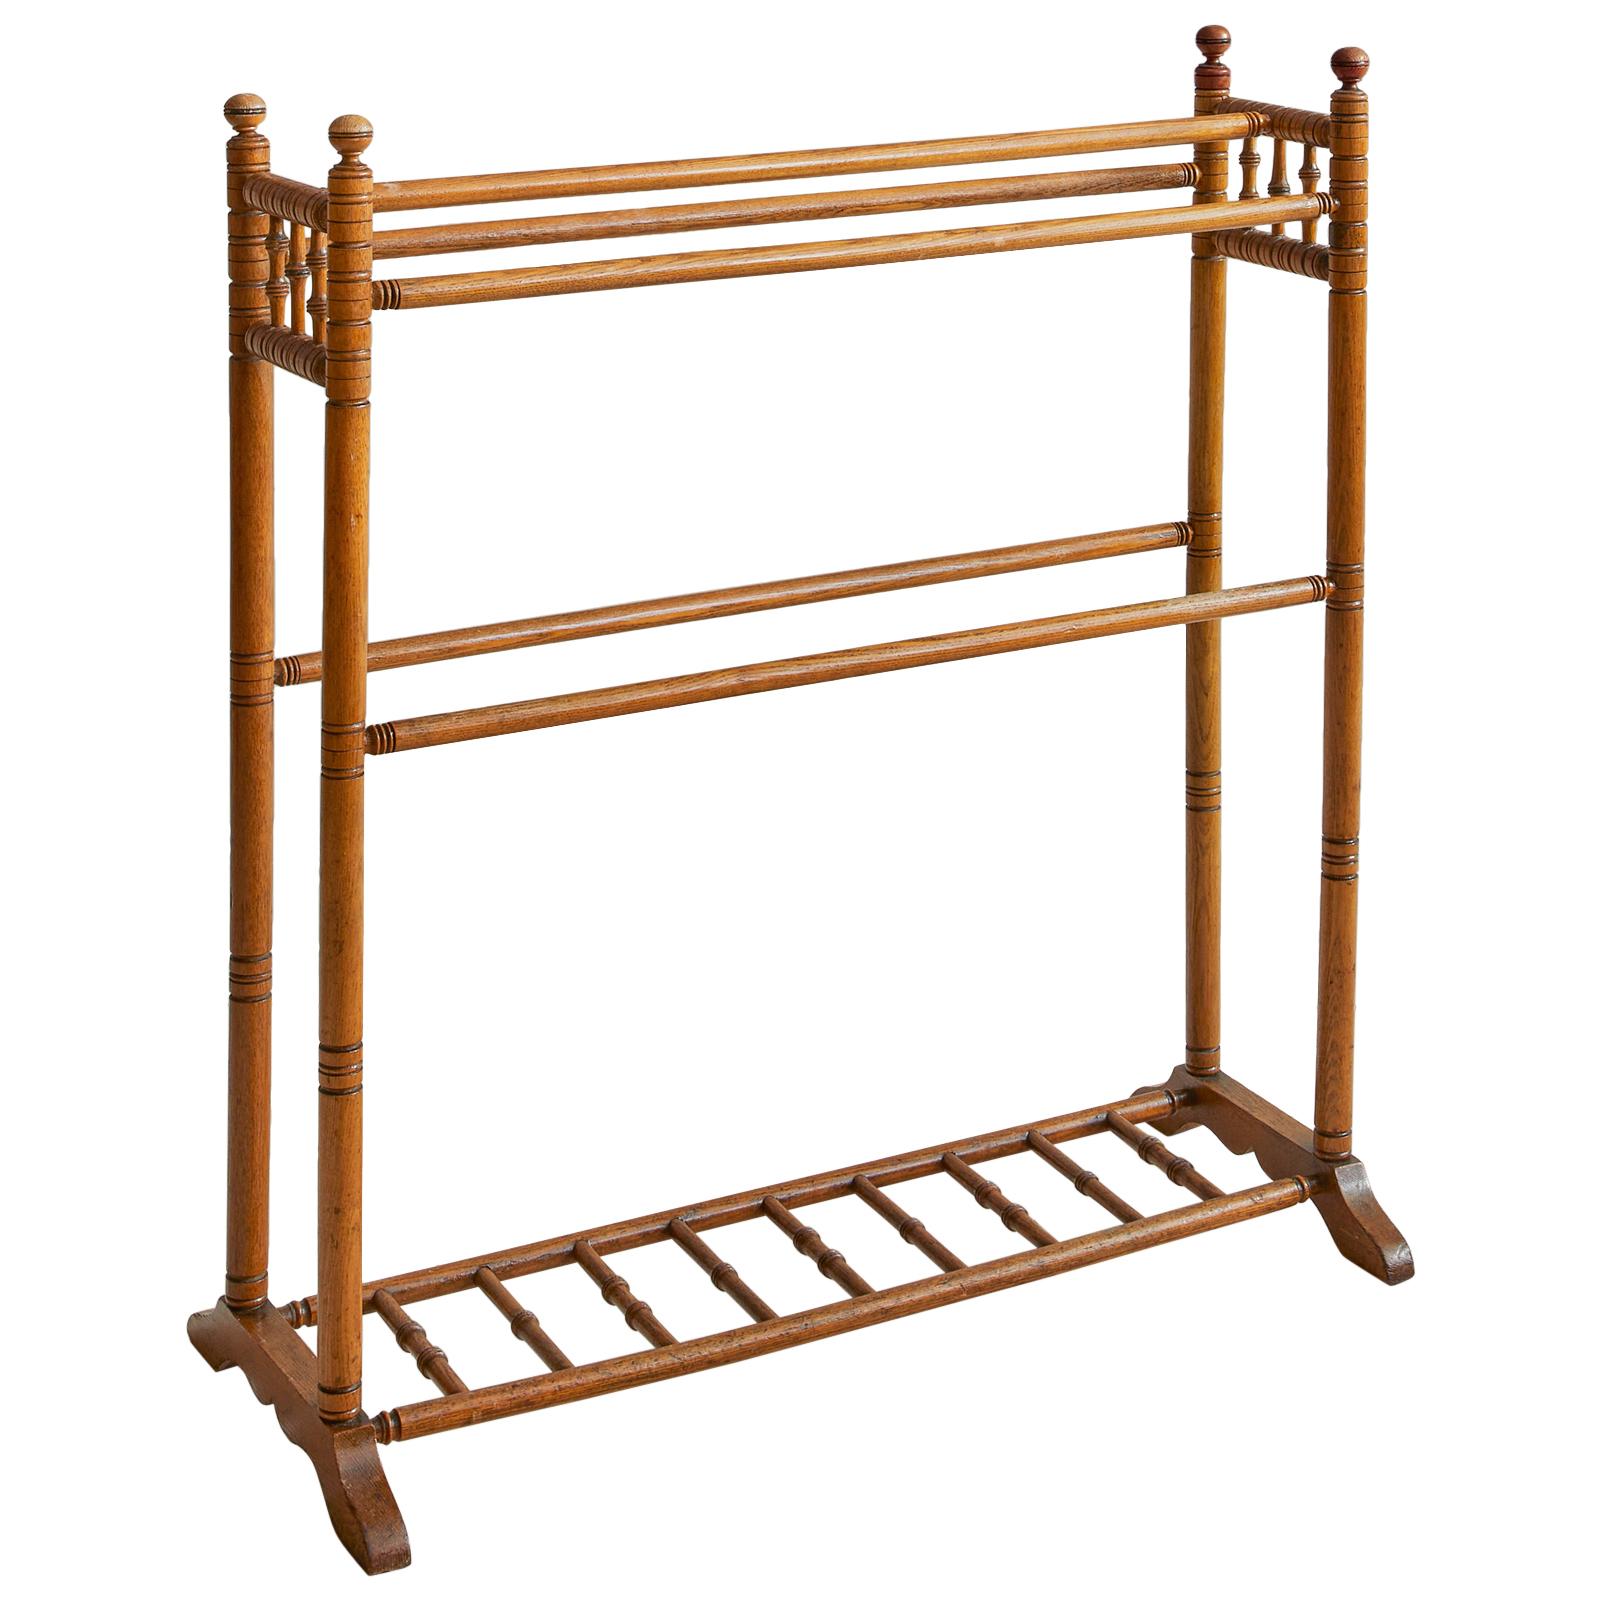 Vintage Arts and Crafts Towel Rail in Wood, England, Late 19th Century